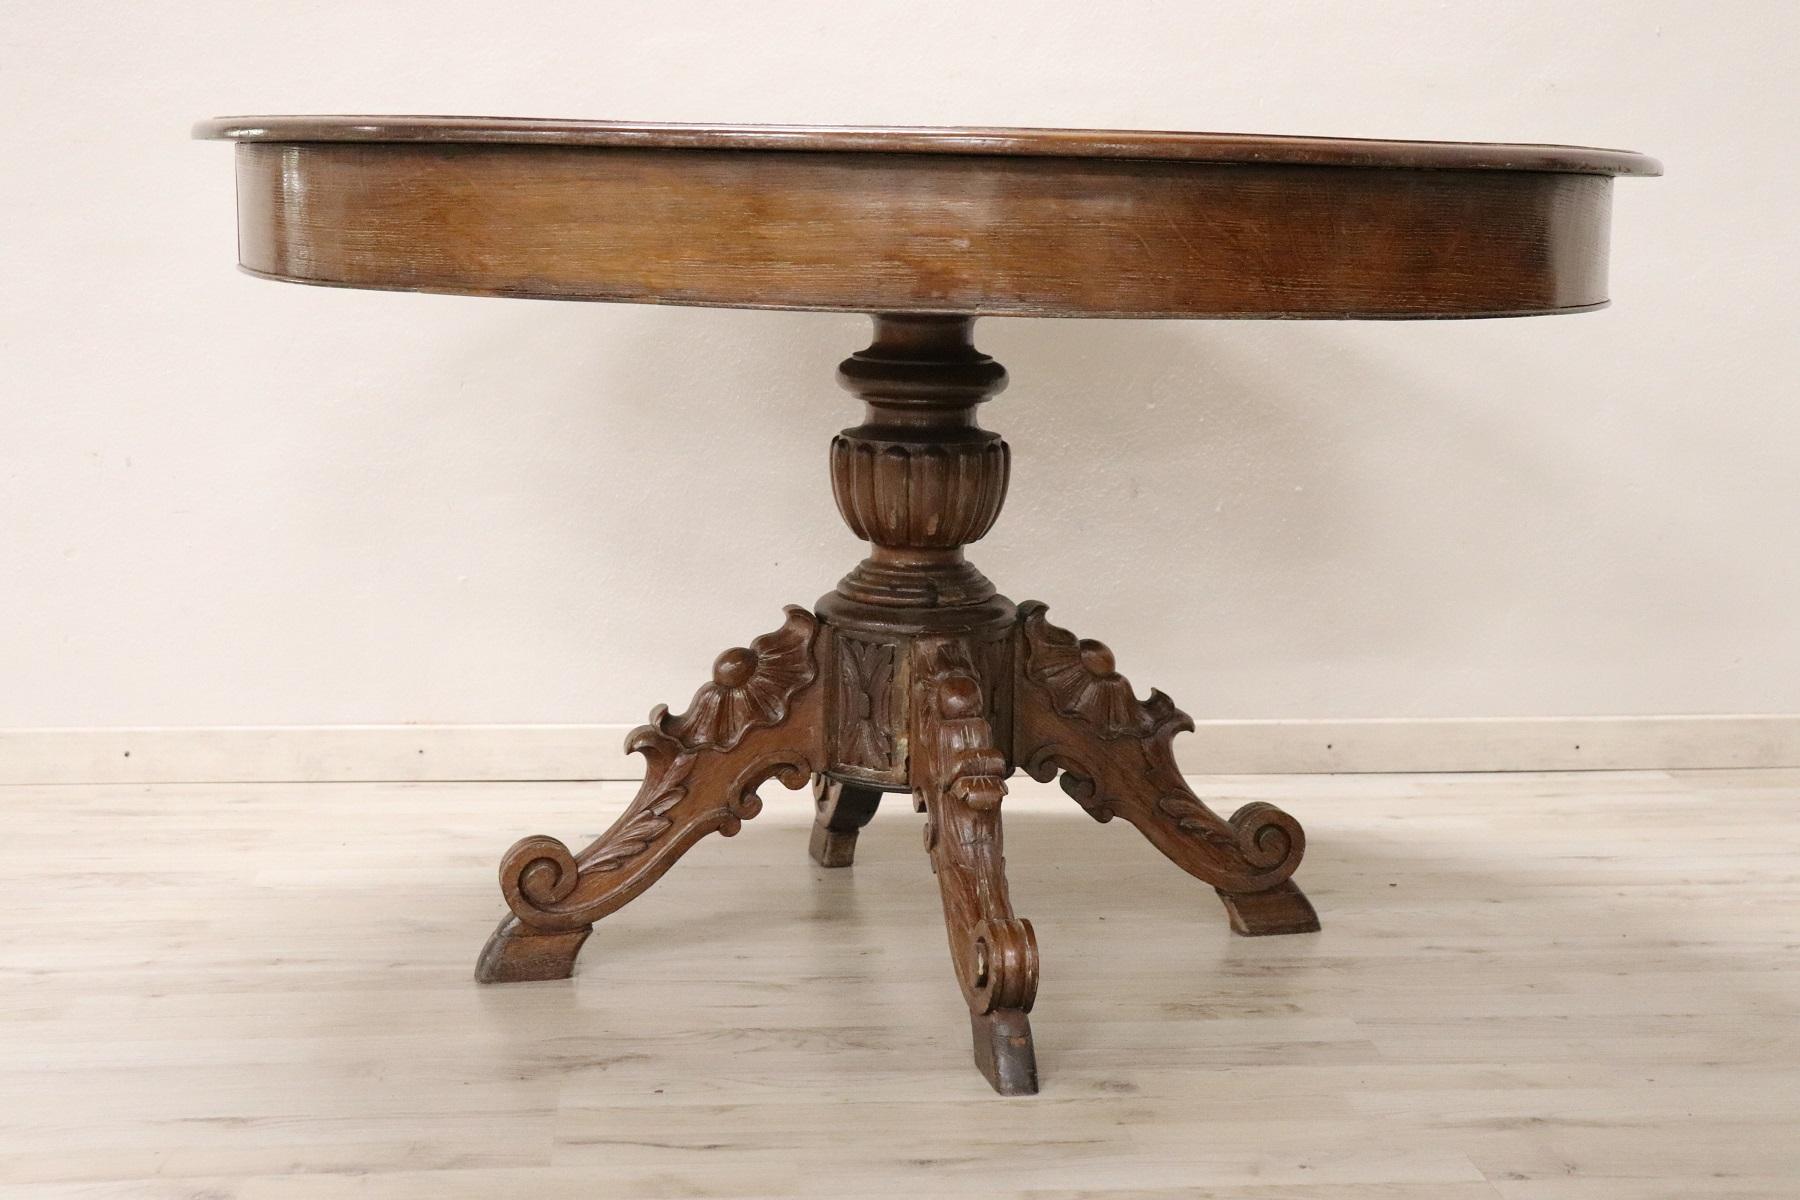 Beautiful important antique round dining room table, 1850s in solid oakwood. This table is perfect for a dining room, it extends into the center becoming a large table that can accommodate many people. The large central pedestal is finely carved in